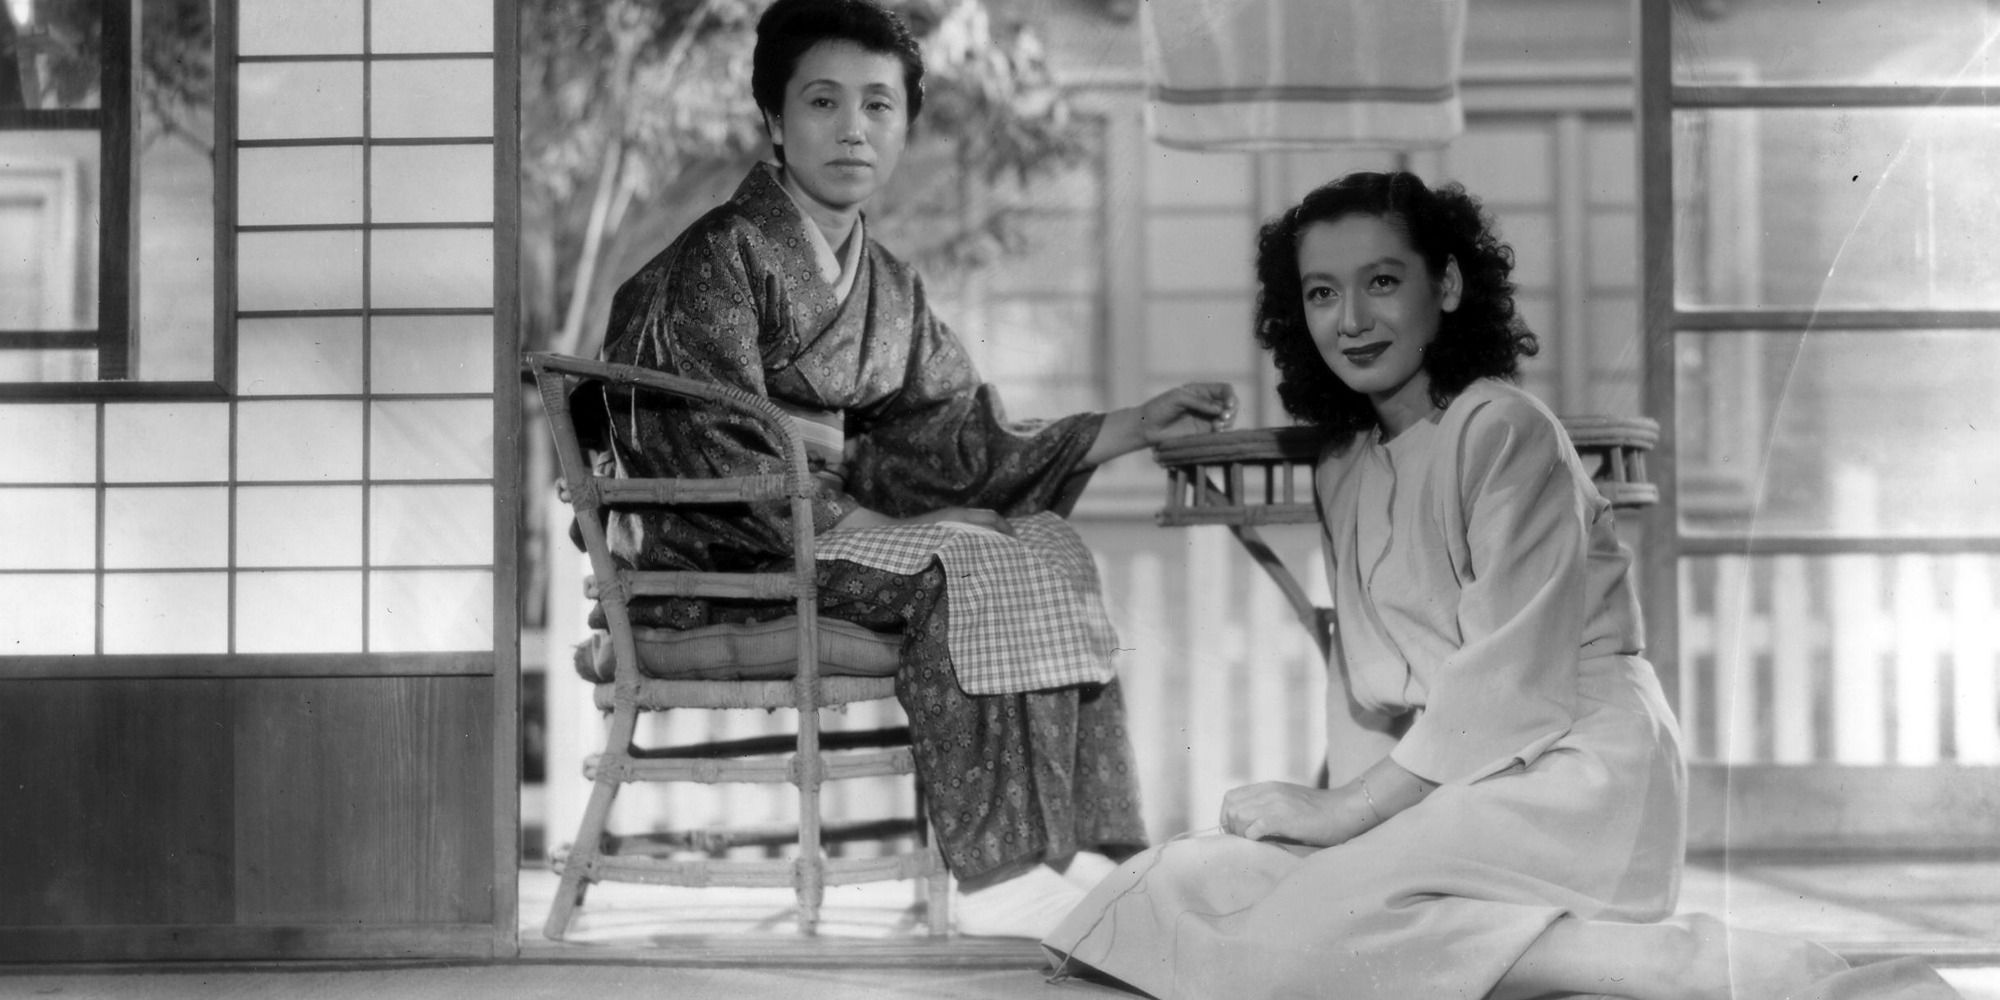 Two women sitting, one on a chair and one on the floor